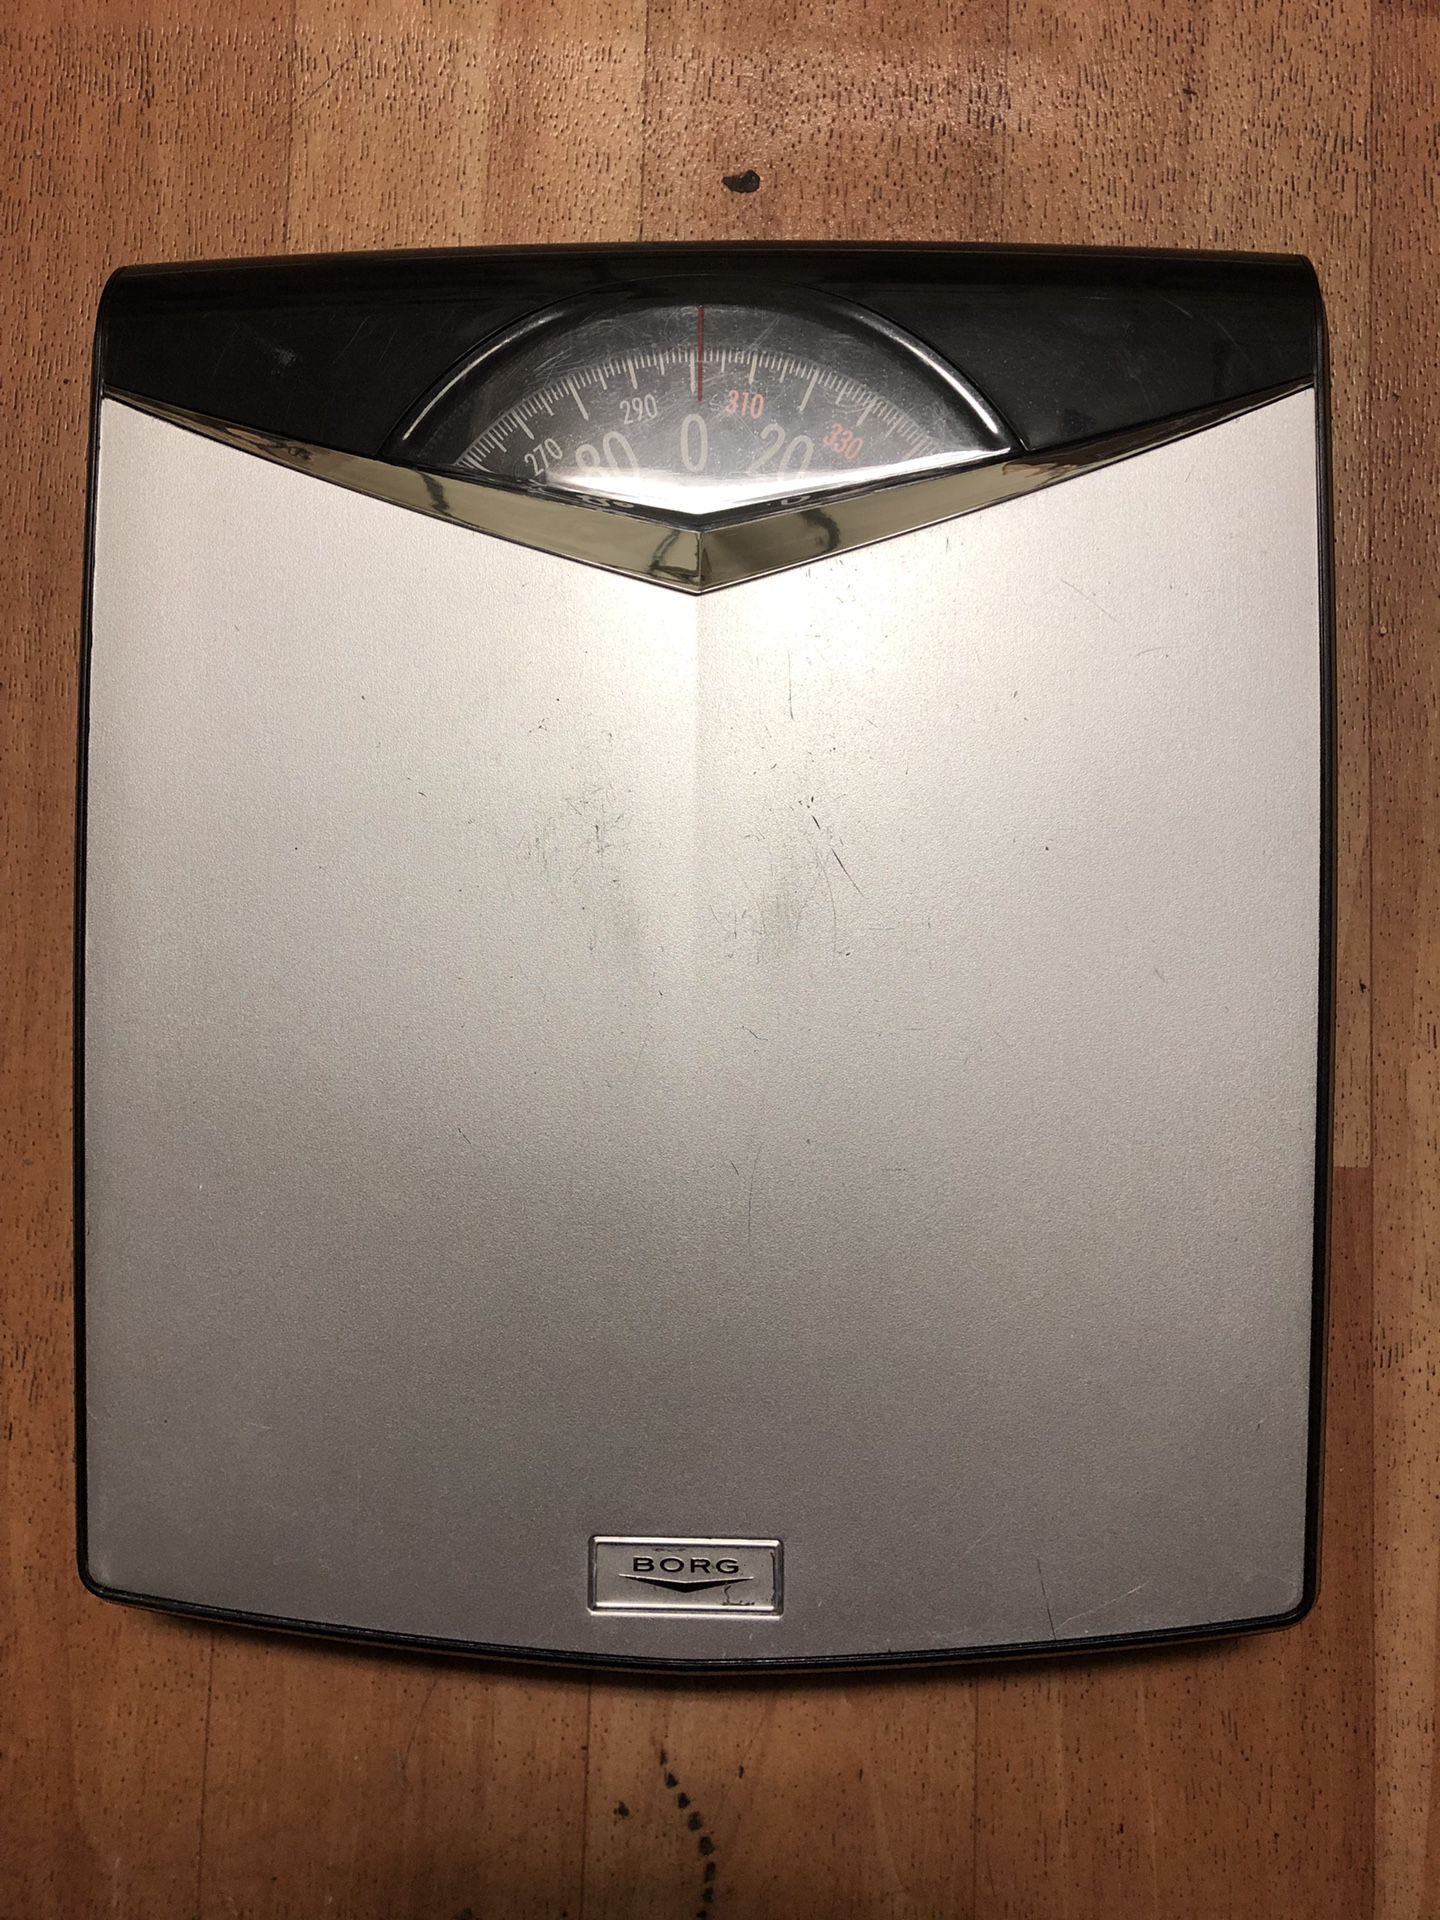 BORG Rotating Dial Weight Scale